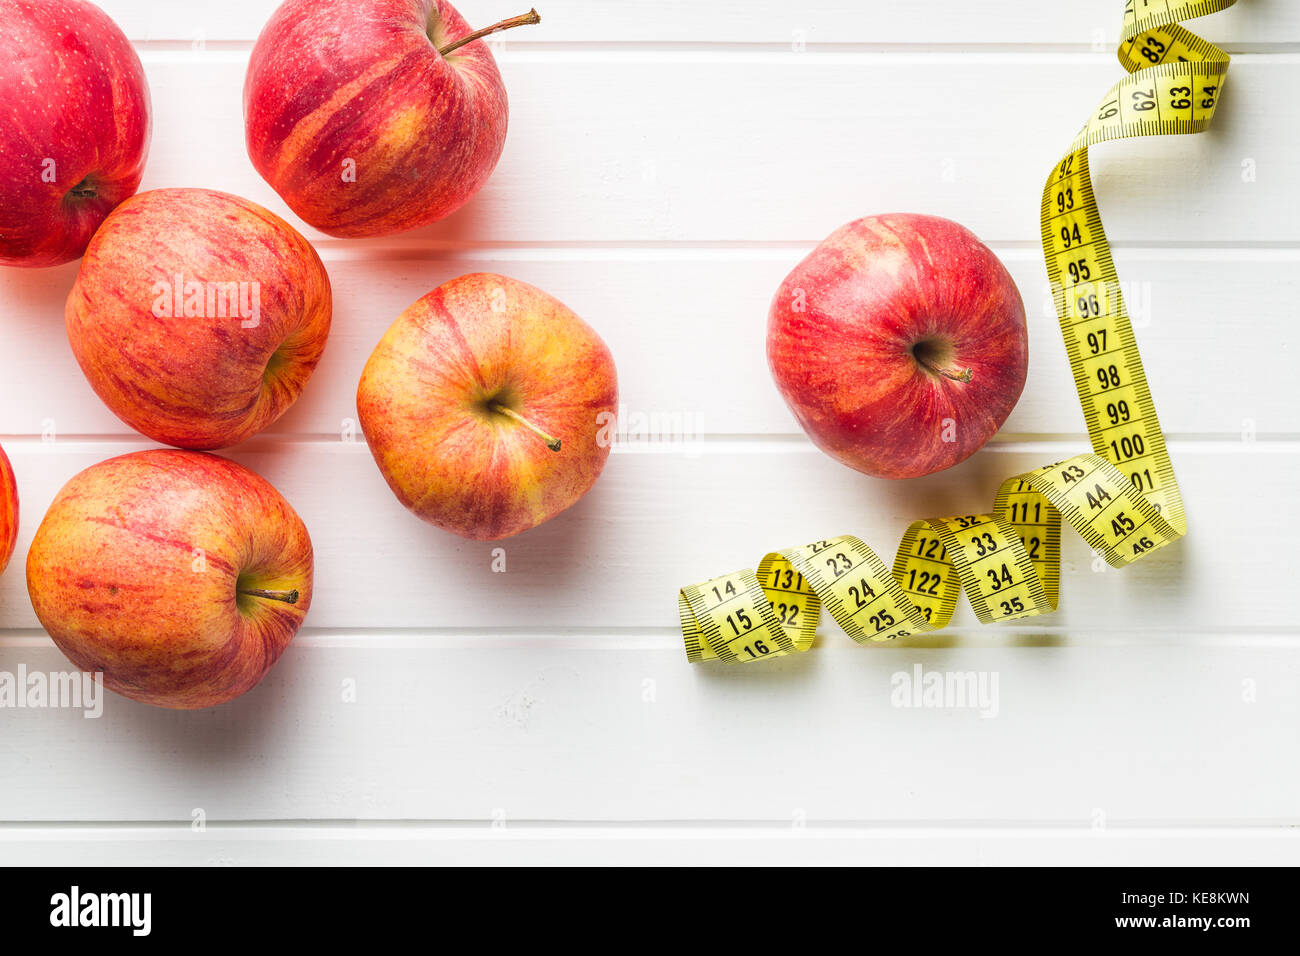 Red apple and measuring tape. Diet concept. Stock Photo